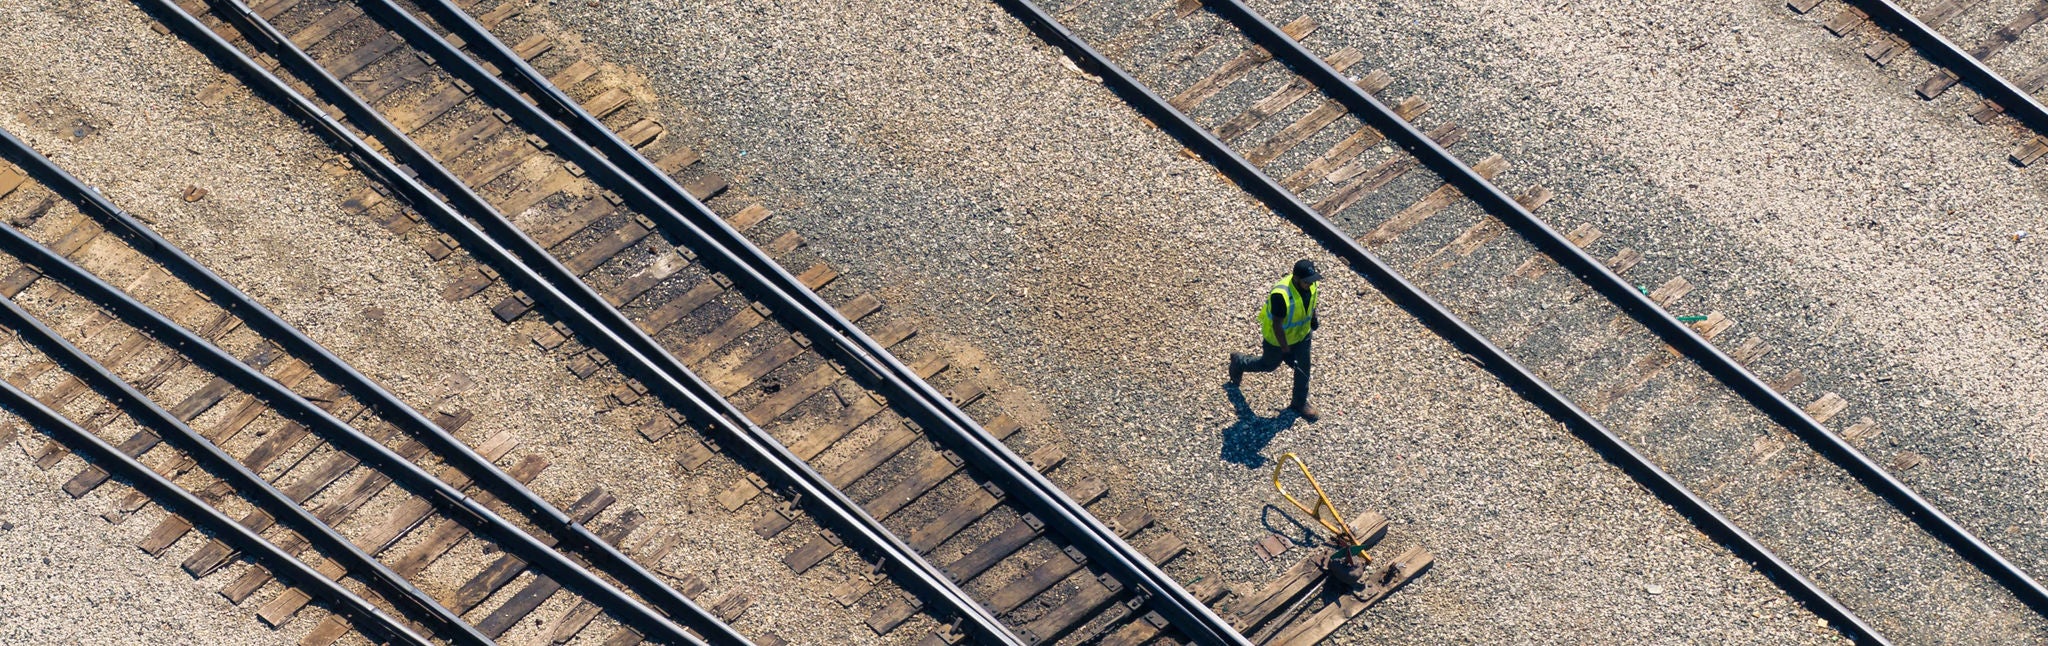 Image alt text: Empty tracks with a person walking by waiting for a train with chemicals transported by rail 